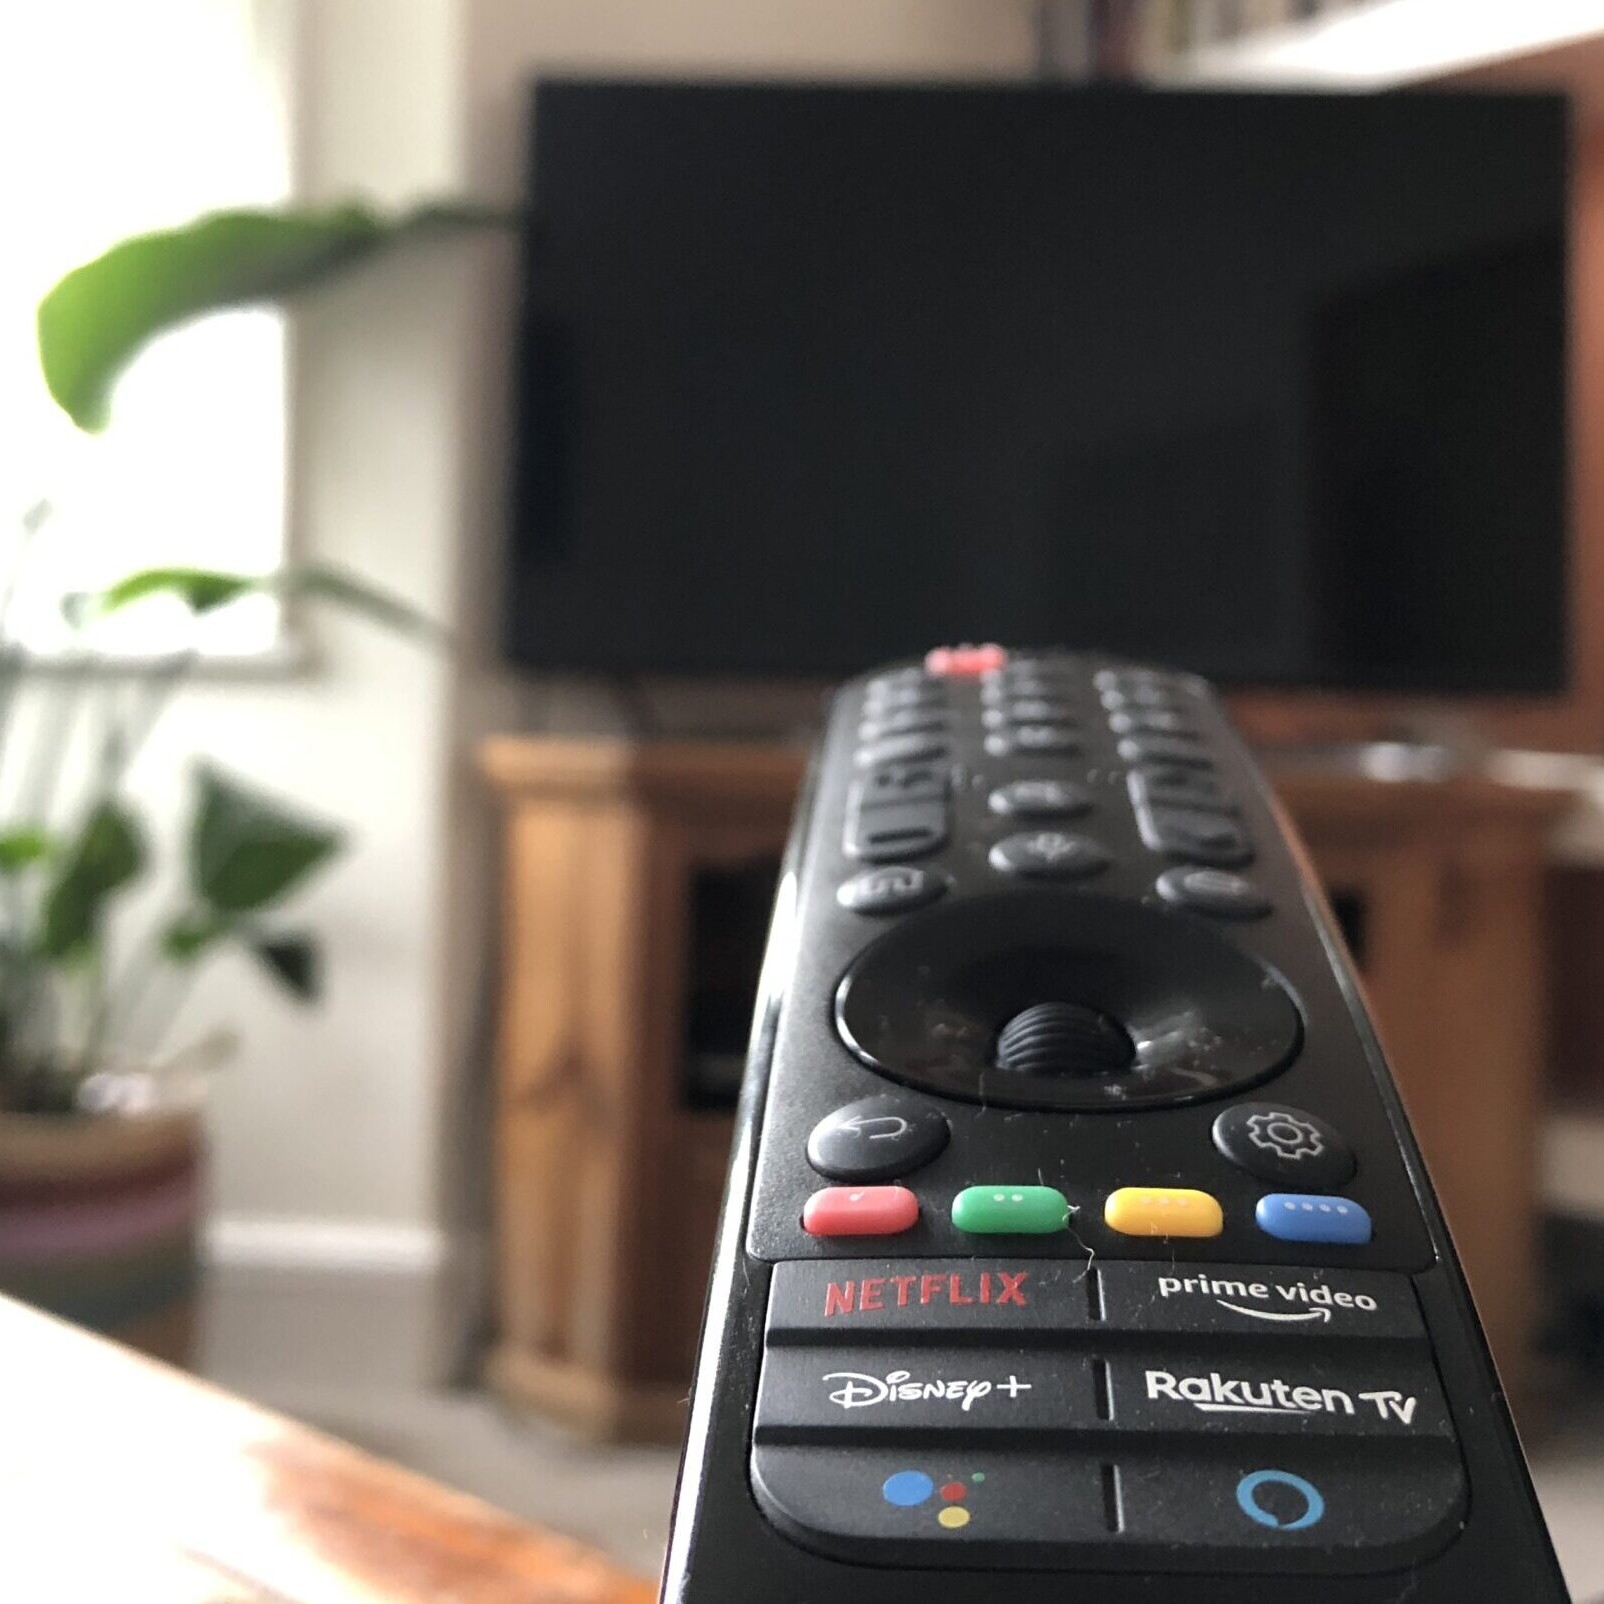 Remote control pointed at a television.